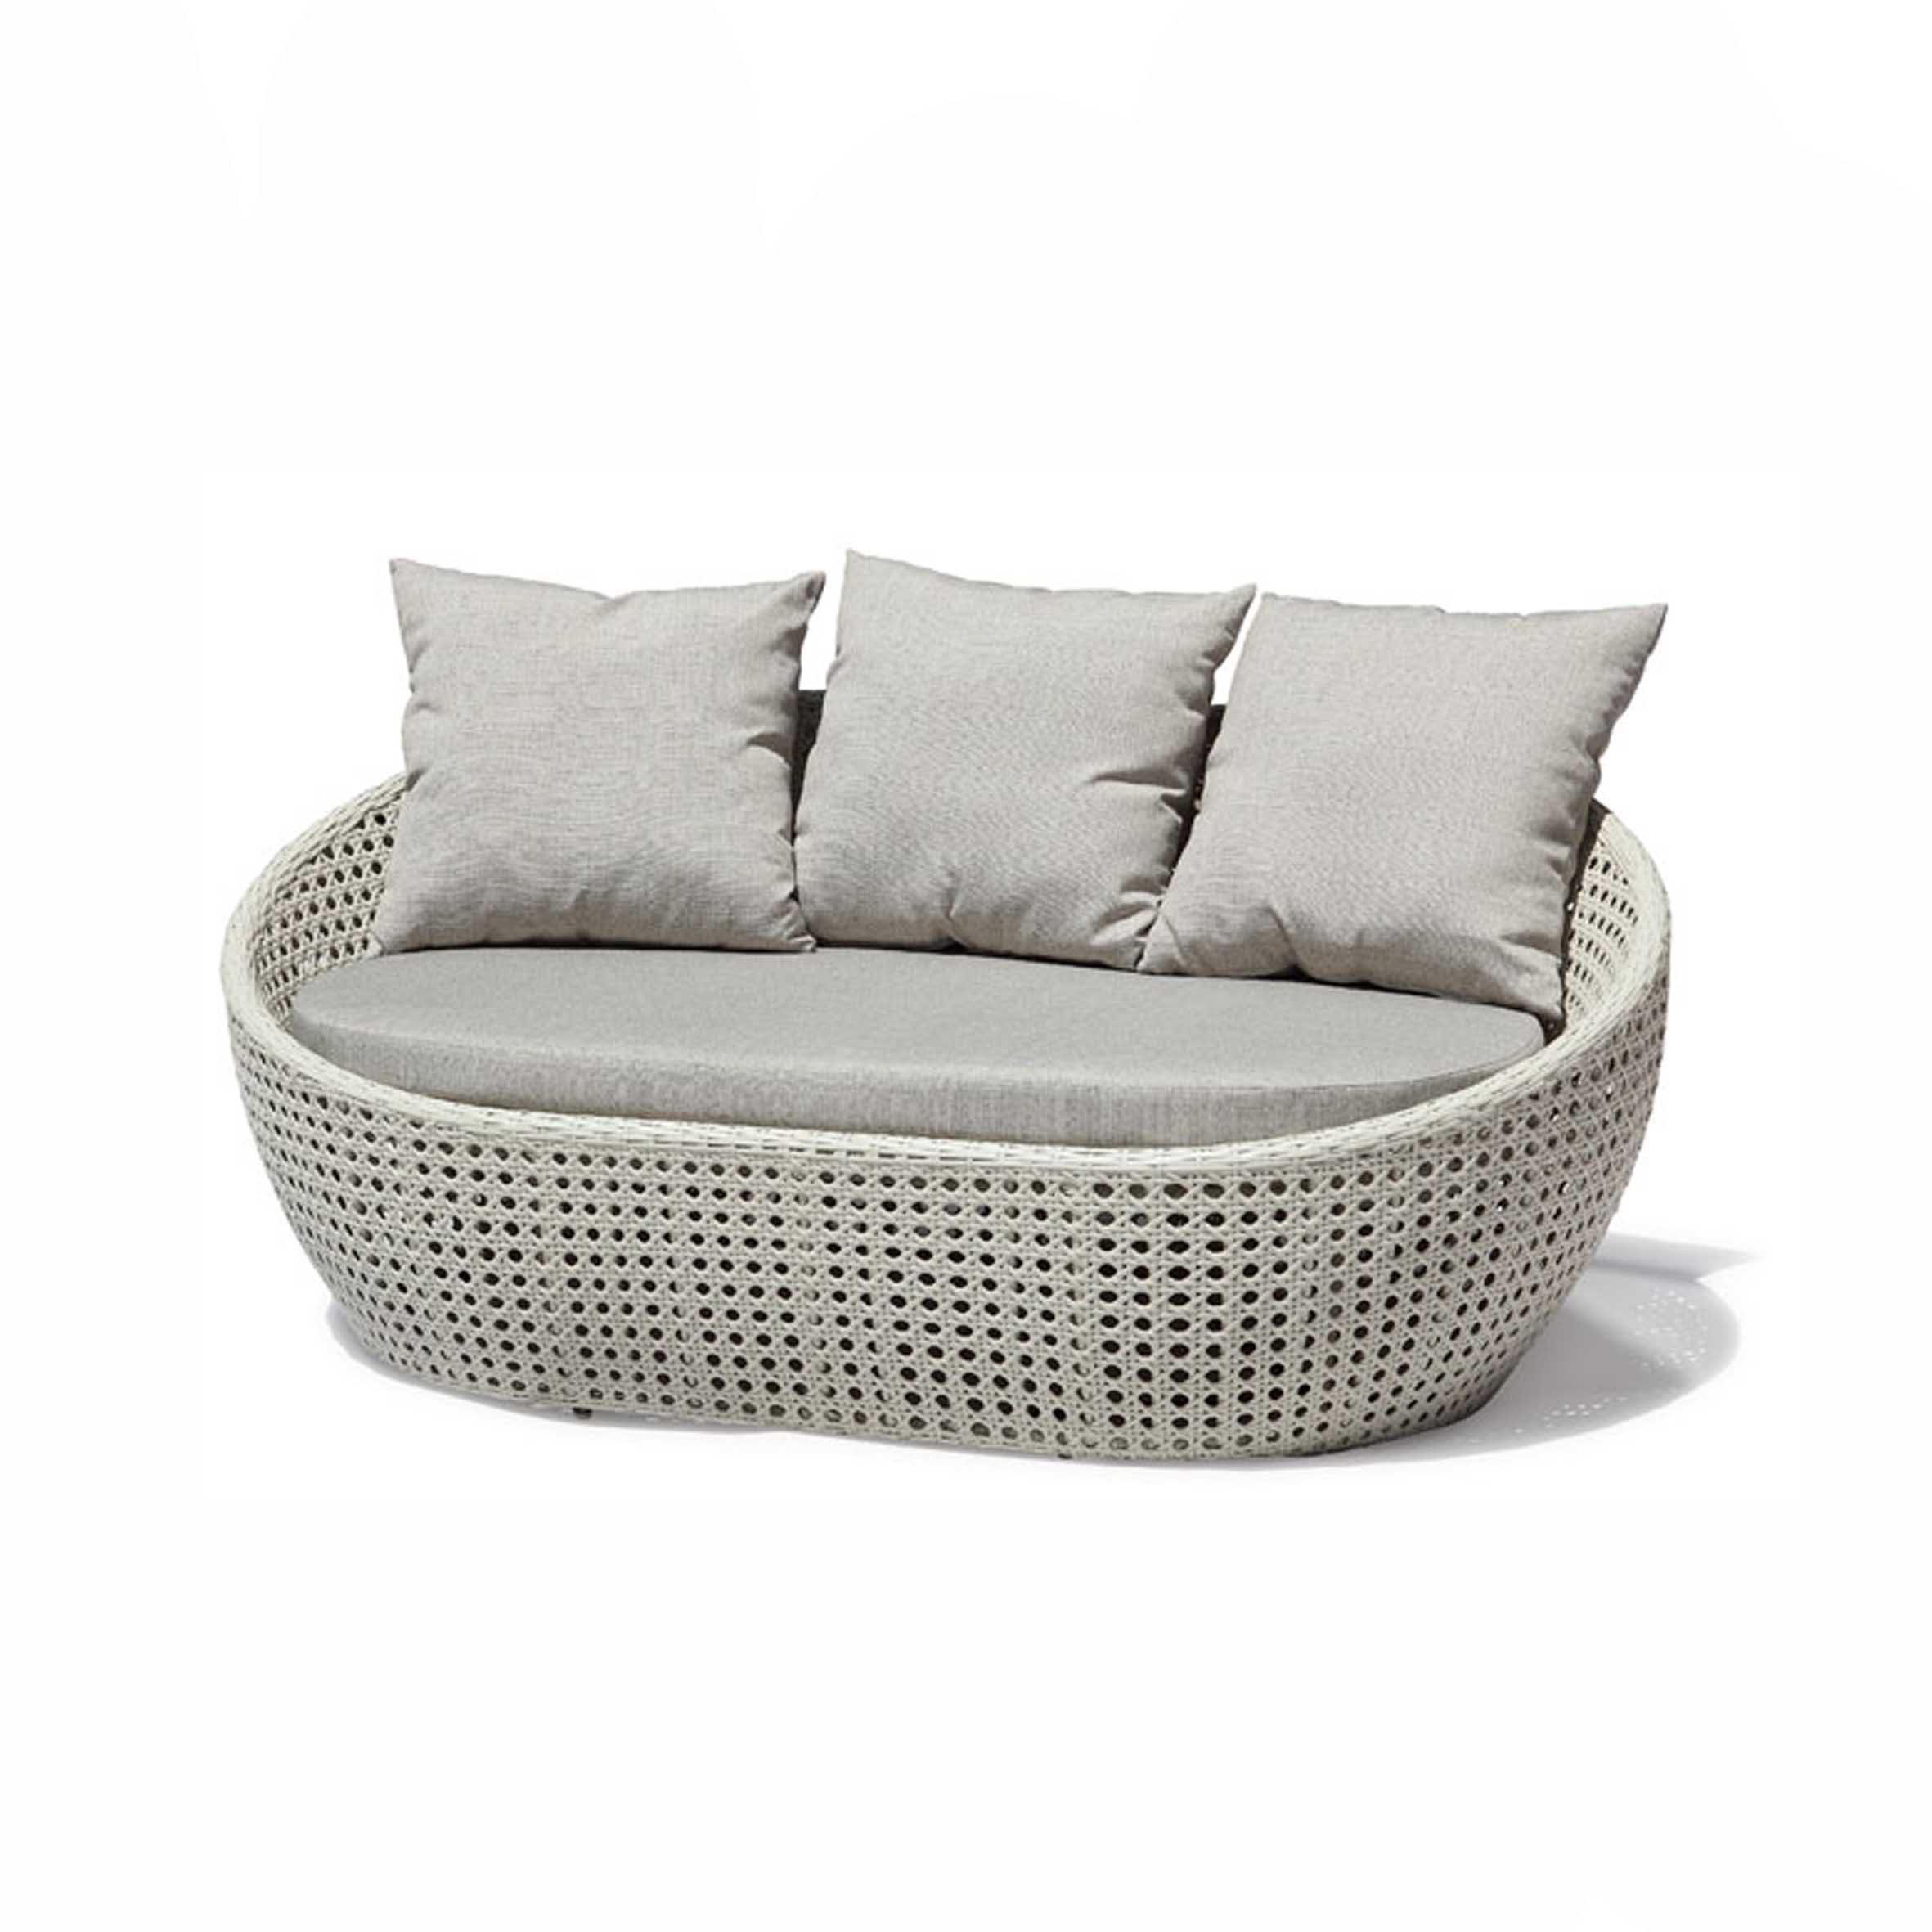 Travis rattan double daybed S5